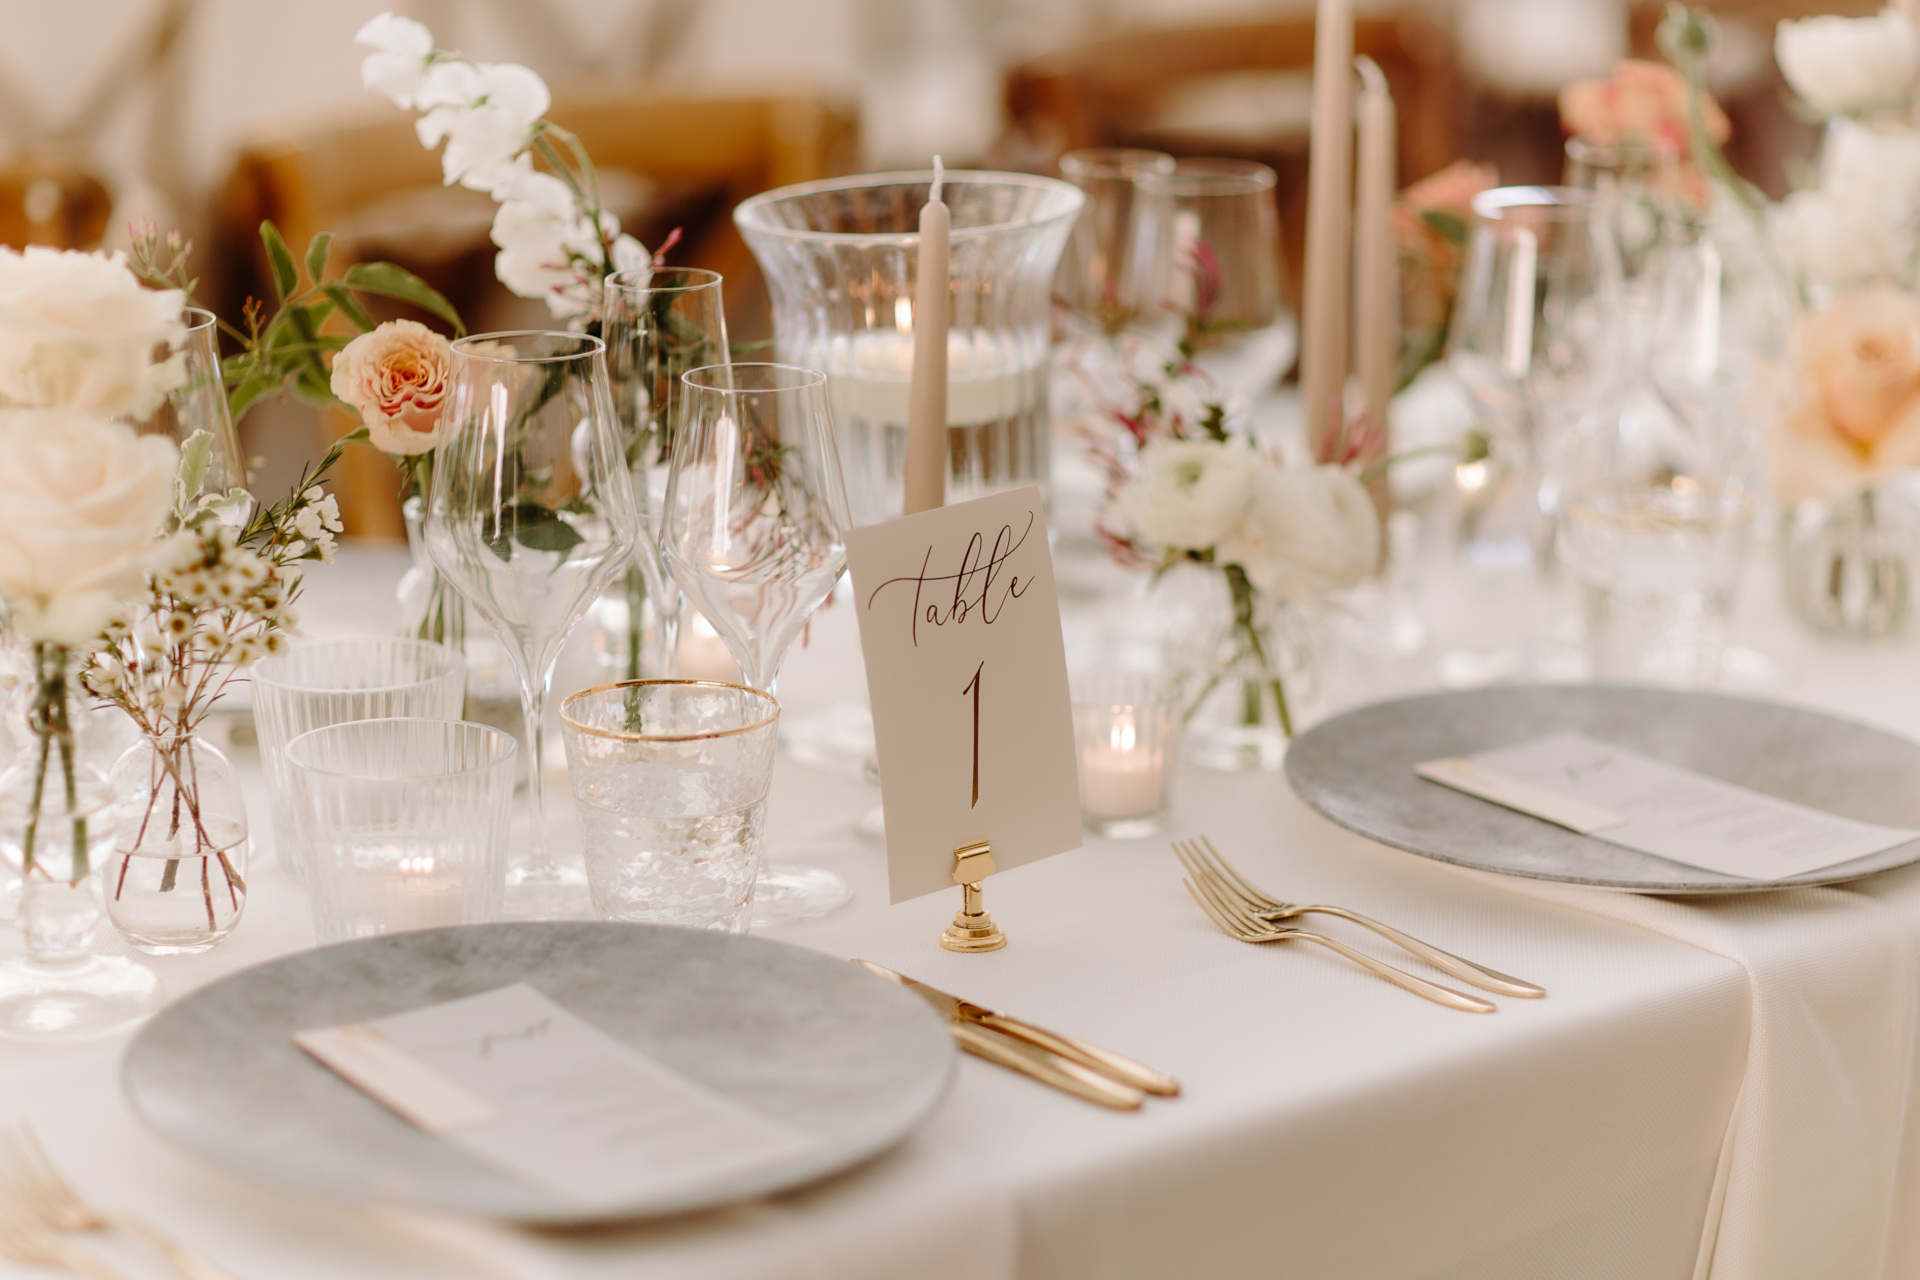 Wedding place setting at table